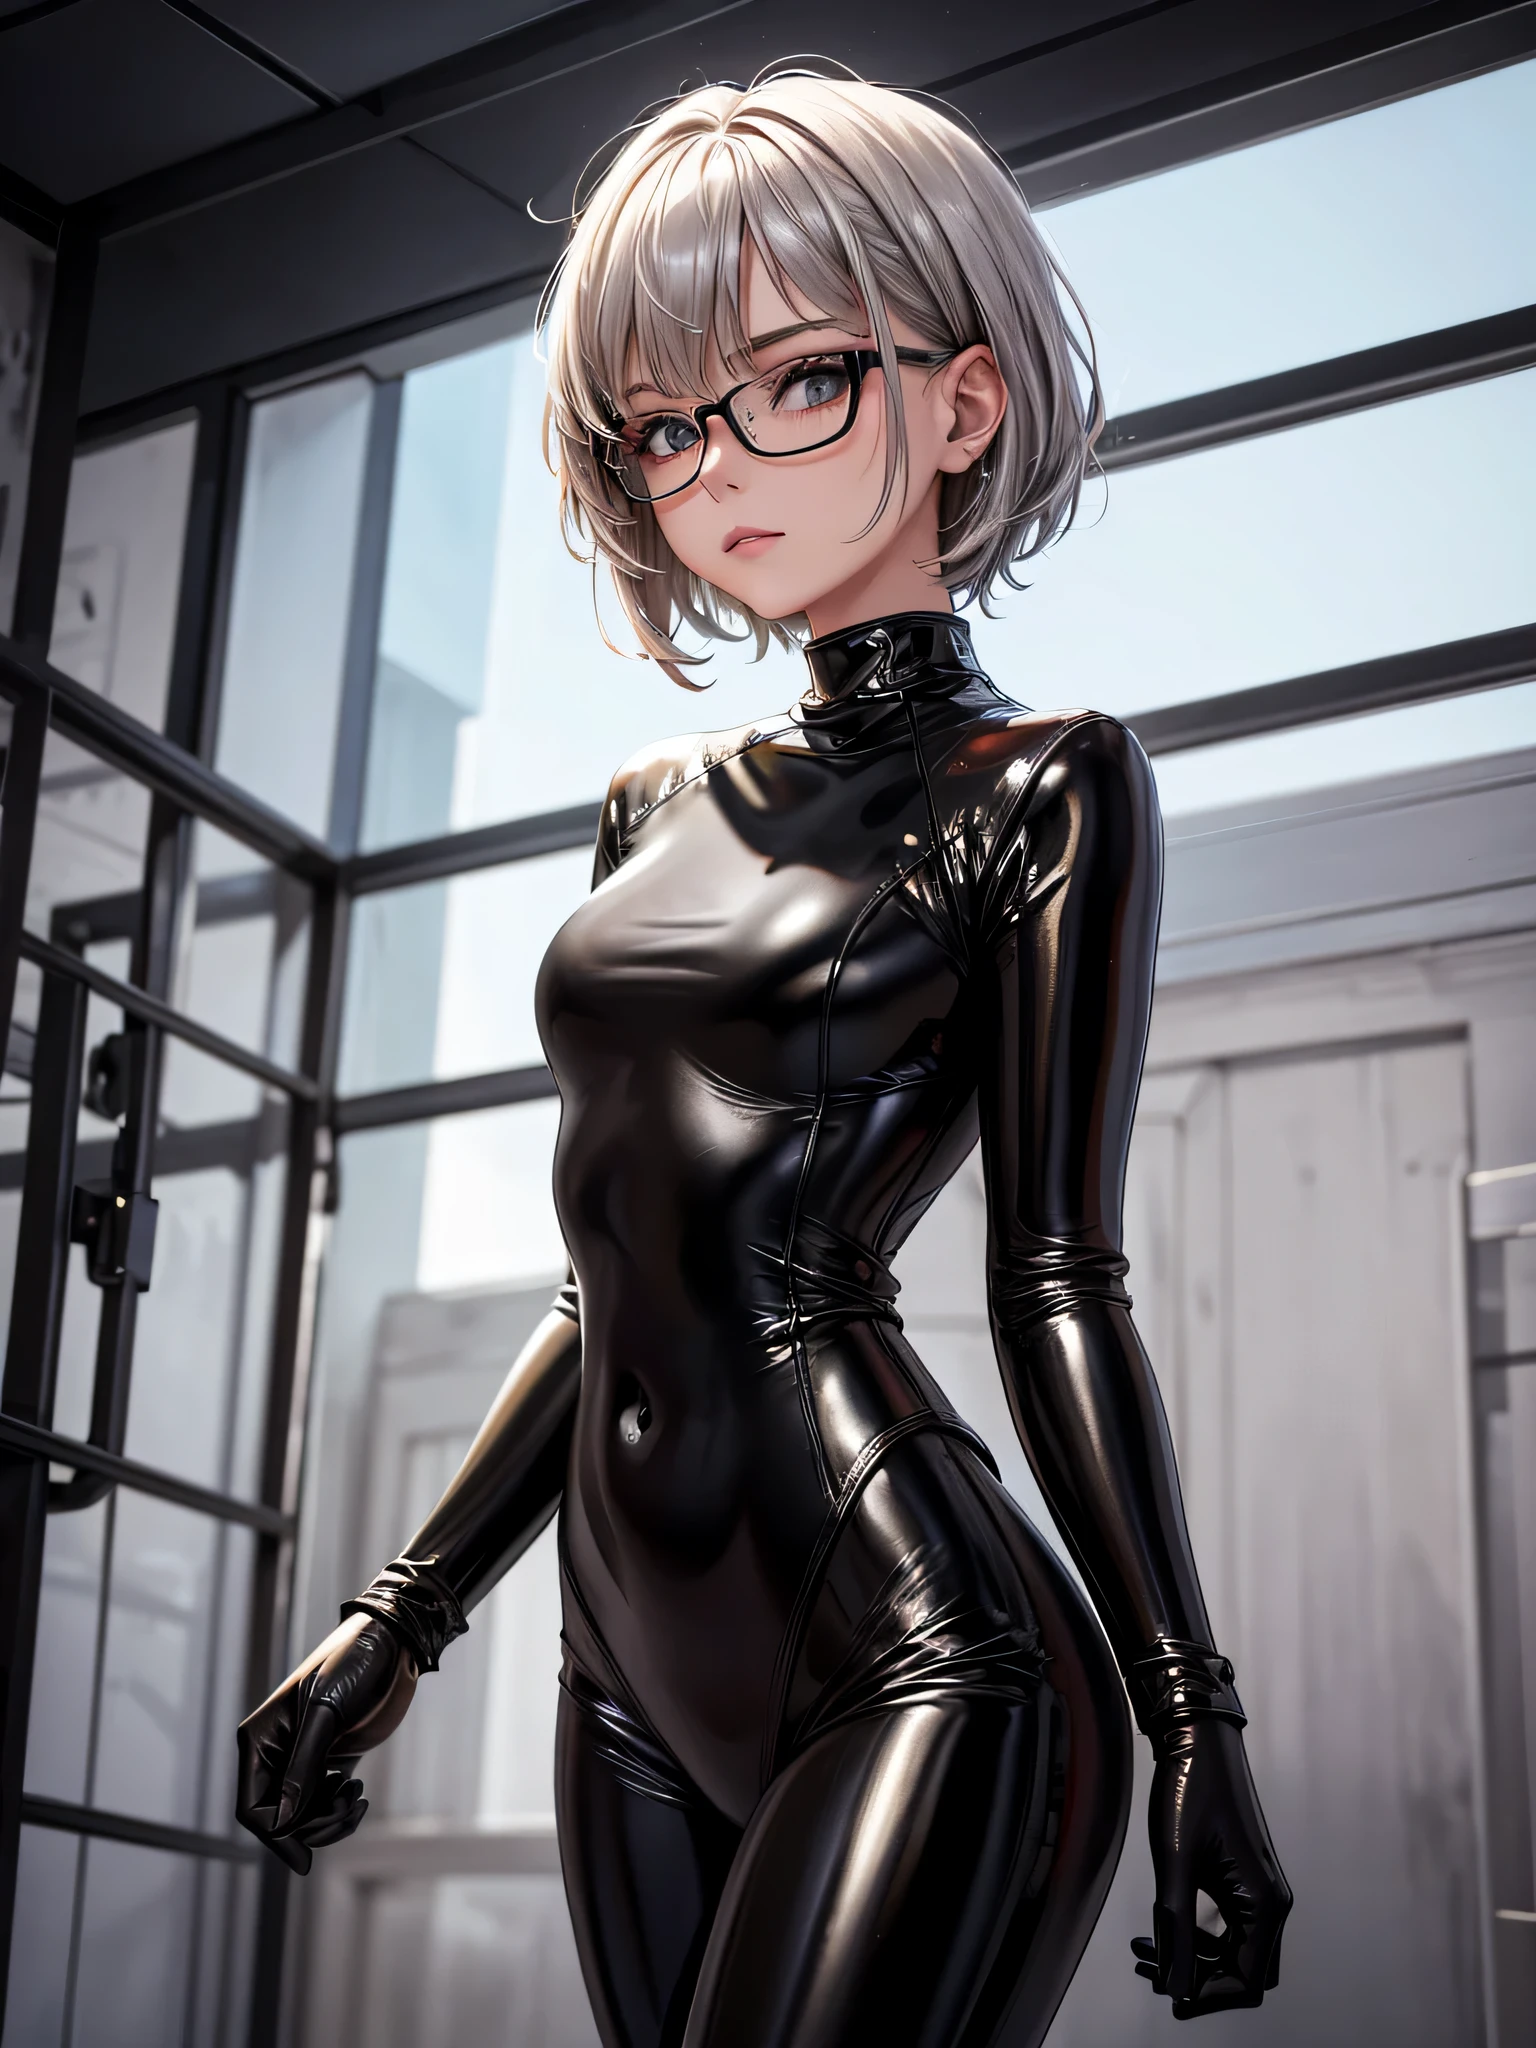 Top quality 8K UHD、A beautiful woman with short hair and silver hair is posing in glasses and a black metallic latex sweatsuit。、black metallic latex sweatsuit with hidden skin